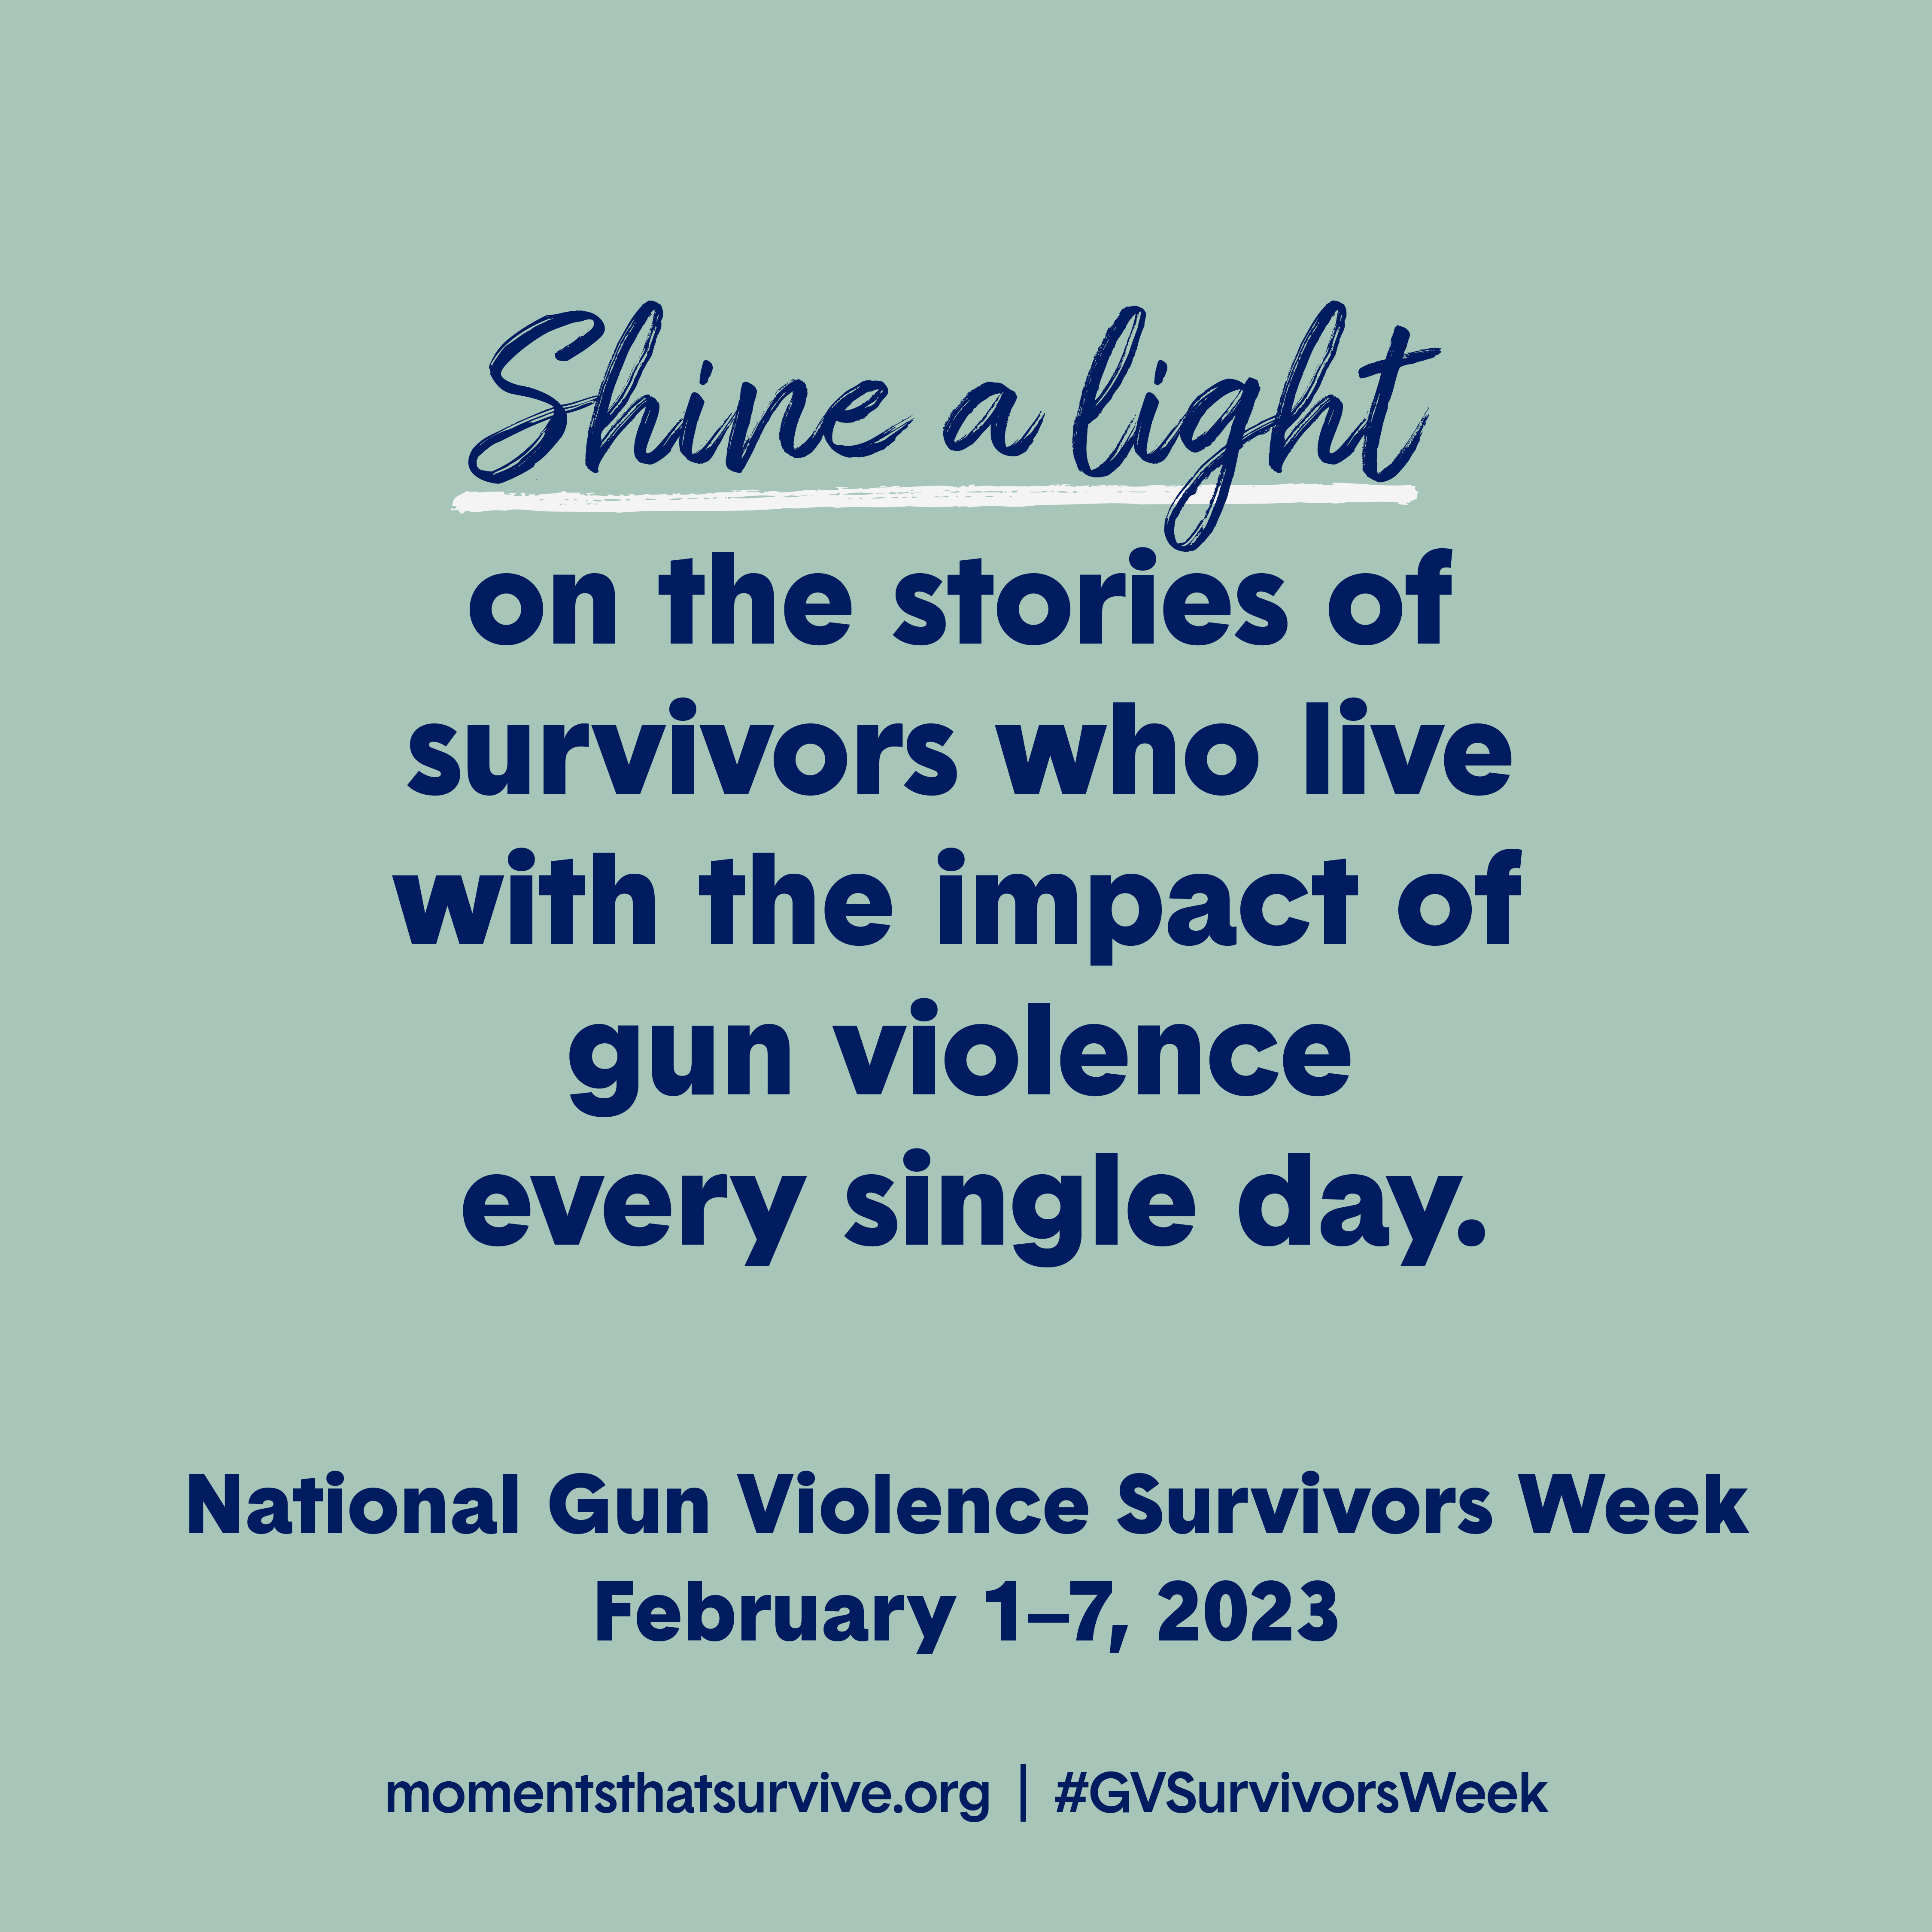 Shine a light on the stories of survivors who live with the impact of gun violence every single day. National Gun Violence Survivors Week, February 1-7, 2023